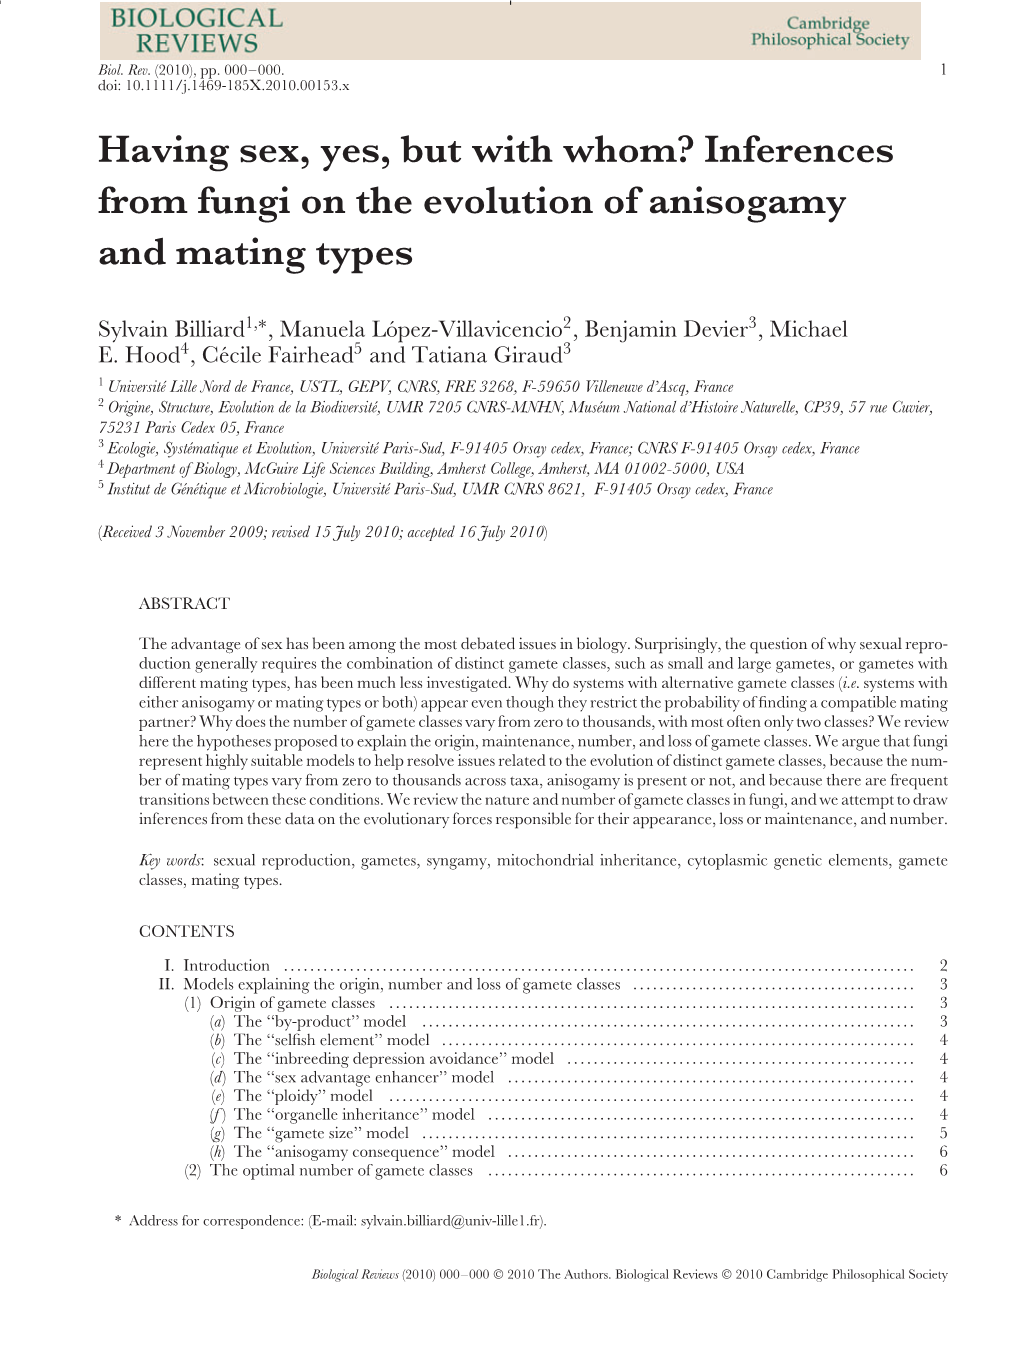 Inferences from Fungi on the Evolution of Anisogamy and Mating Types